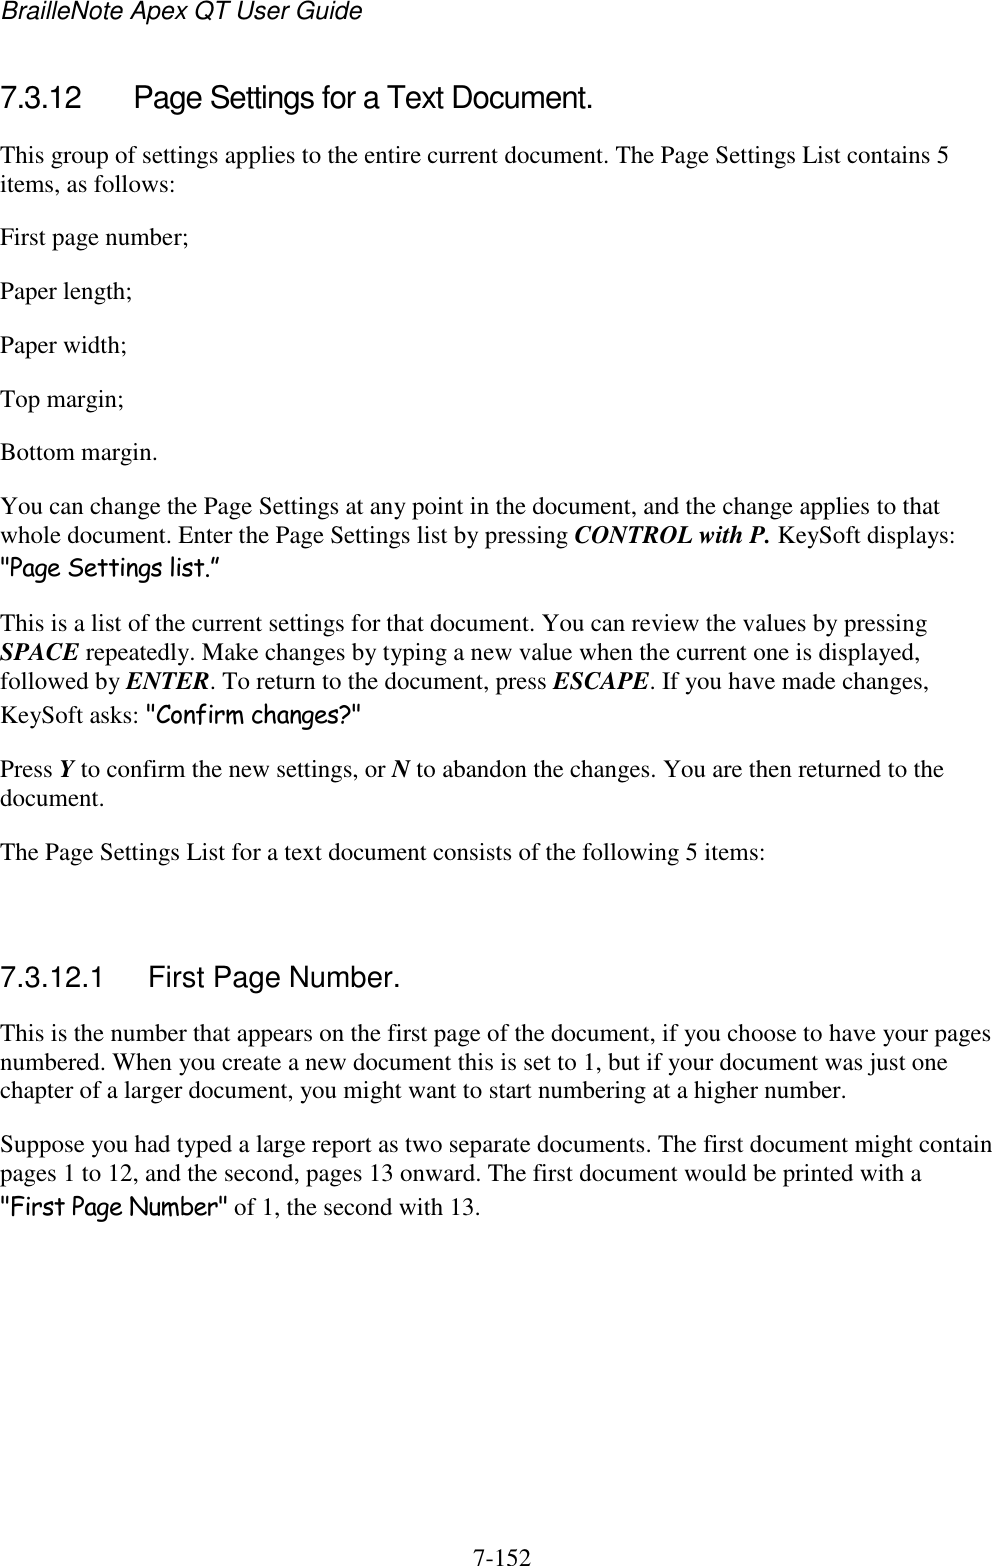 BrailleNote Apex QT User Guide  7-152   7.3.12  Page Settings for a Text Document. This group of settings applies to the entire current document. The Page Settings List contains 5 items, as follows: First page number; Paper length; Paper width; Top margin; Bottom margin. You can change the Page Settings at any point in the document, and the change applies to that whole document. Enter the Page Settings list by pressing CONTROL with P. KeySoft displays: &quot;Page Settings list.” This is a list of the current settings for that document. You can review the values by pressing SPACE repeatedly. Make changes by typing a new value when the current one is displayed, followed by ENTER. To return to the document, press ESCAPE. If you have made changes, KeySoft asks: &quot;Confirm changes?&quot; Press Y to confirm the new settings, or N to abandon the changes. You are then returned to the document. The Page Settings List for a text document consists of the following 5 items:   7.3.12.1  First Page Number. This is the number that appears on the first page of the document, if you choose to have your pages numbered. When you create a new document this is set to 1, but if your document was just one chapter of a larger document, you might want to start numbering at a higher number. Suppose you had typed a large report as two separate documents. The first document might contain pages 1 to 12, and the second, pages 13 onward. The first document would be printed with a &quot;First Page Number&quot; of 1, the second with 13.   